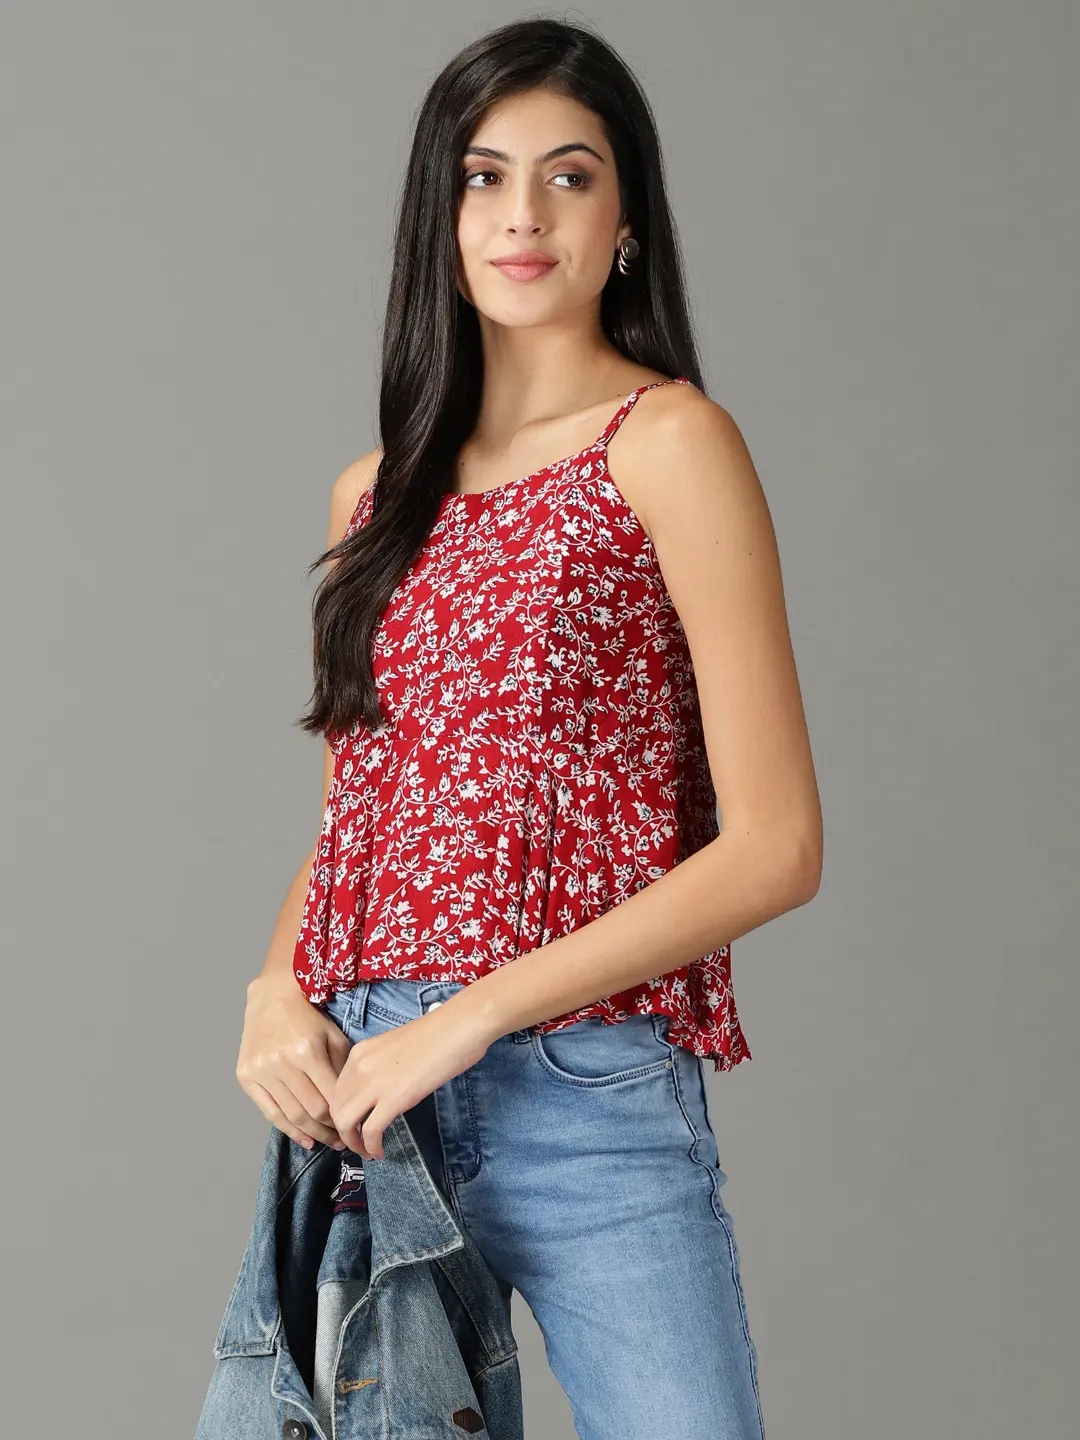 SHOWOFF Women's Sleeveless Shoulder Straps Red Printed Top